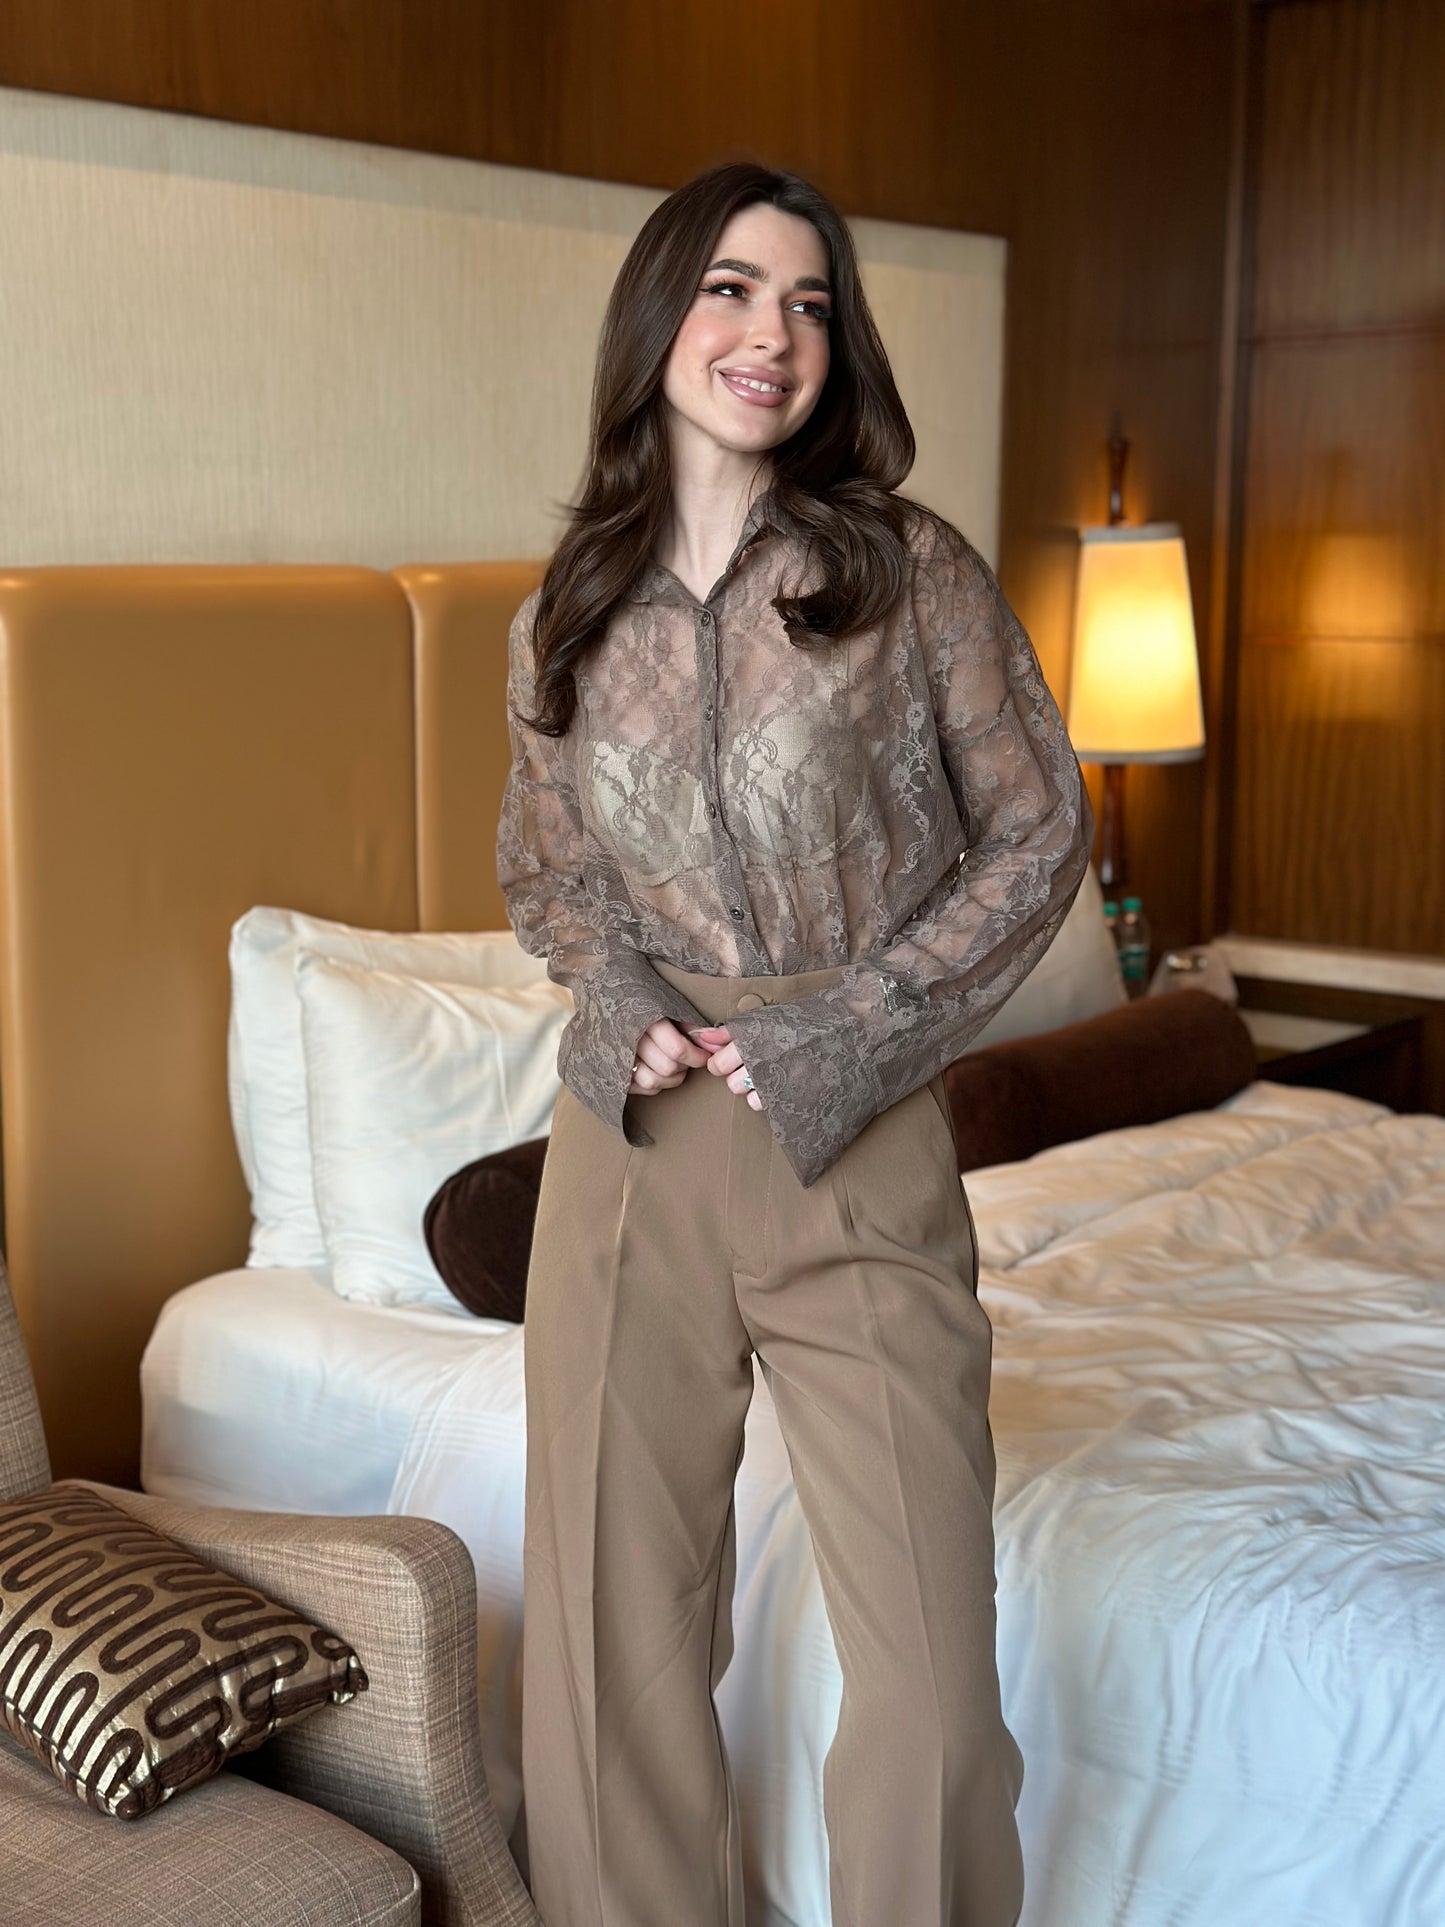 Lace See Through Shirt With Beige Pants